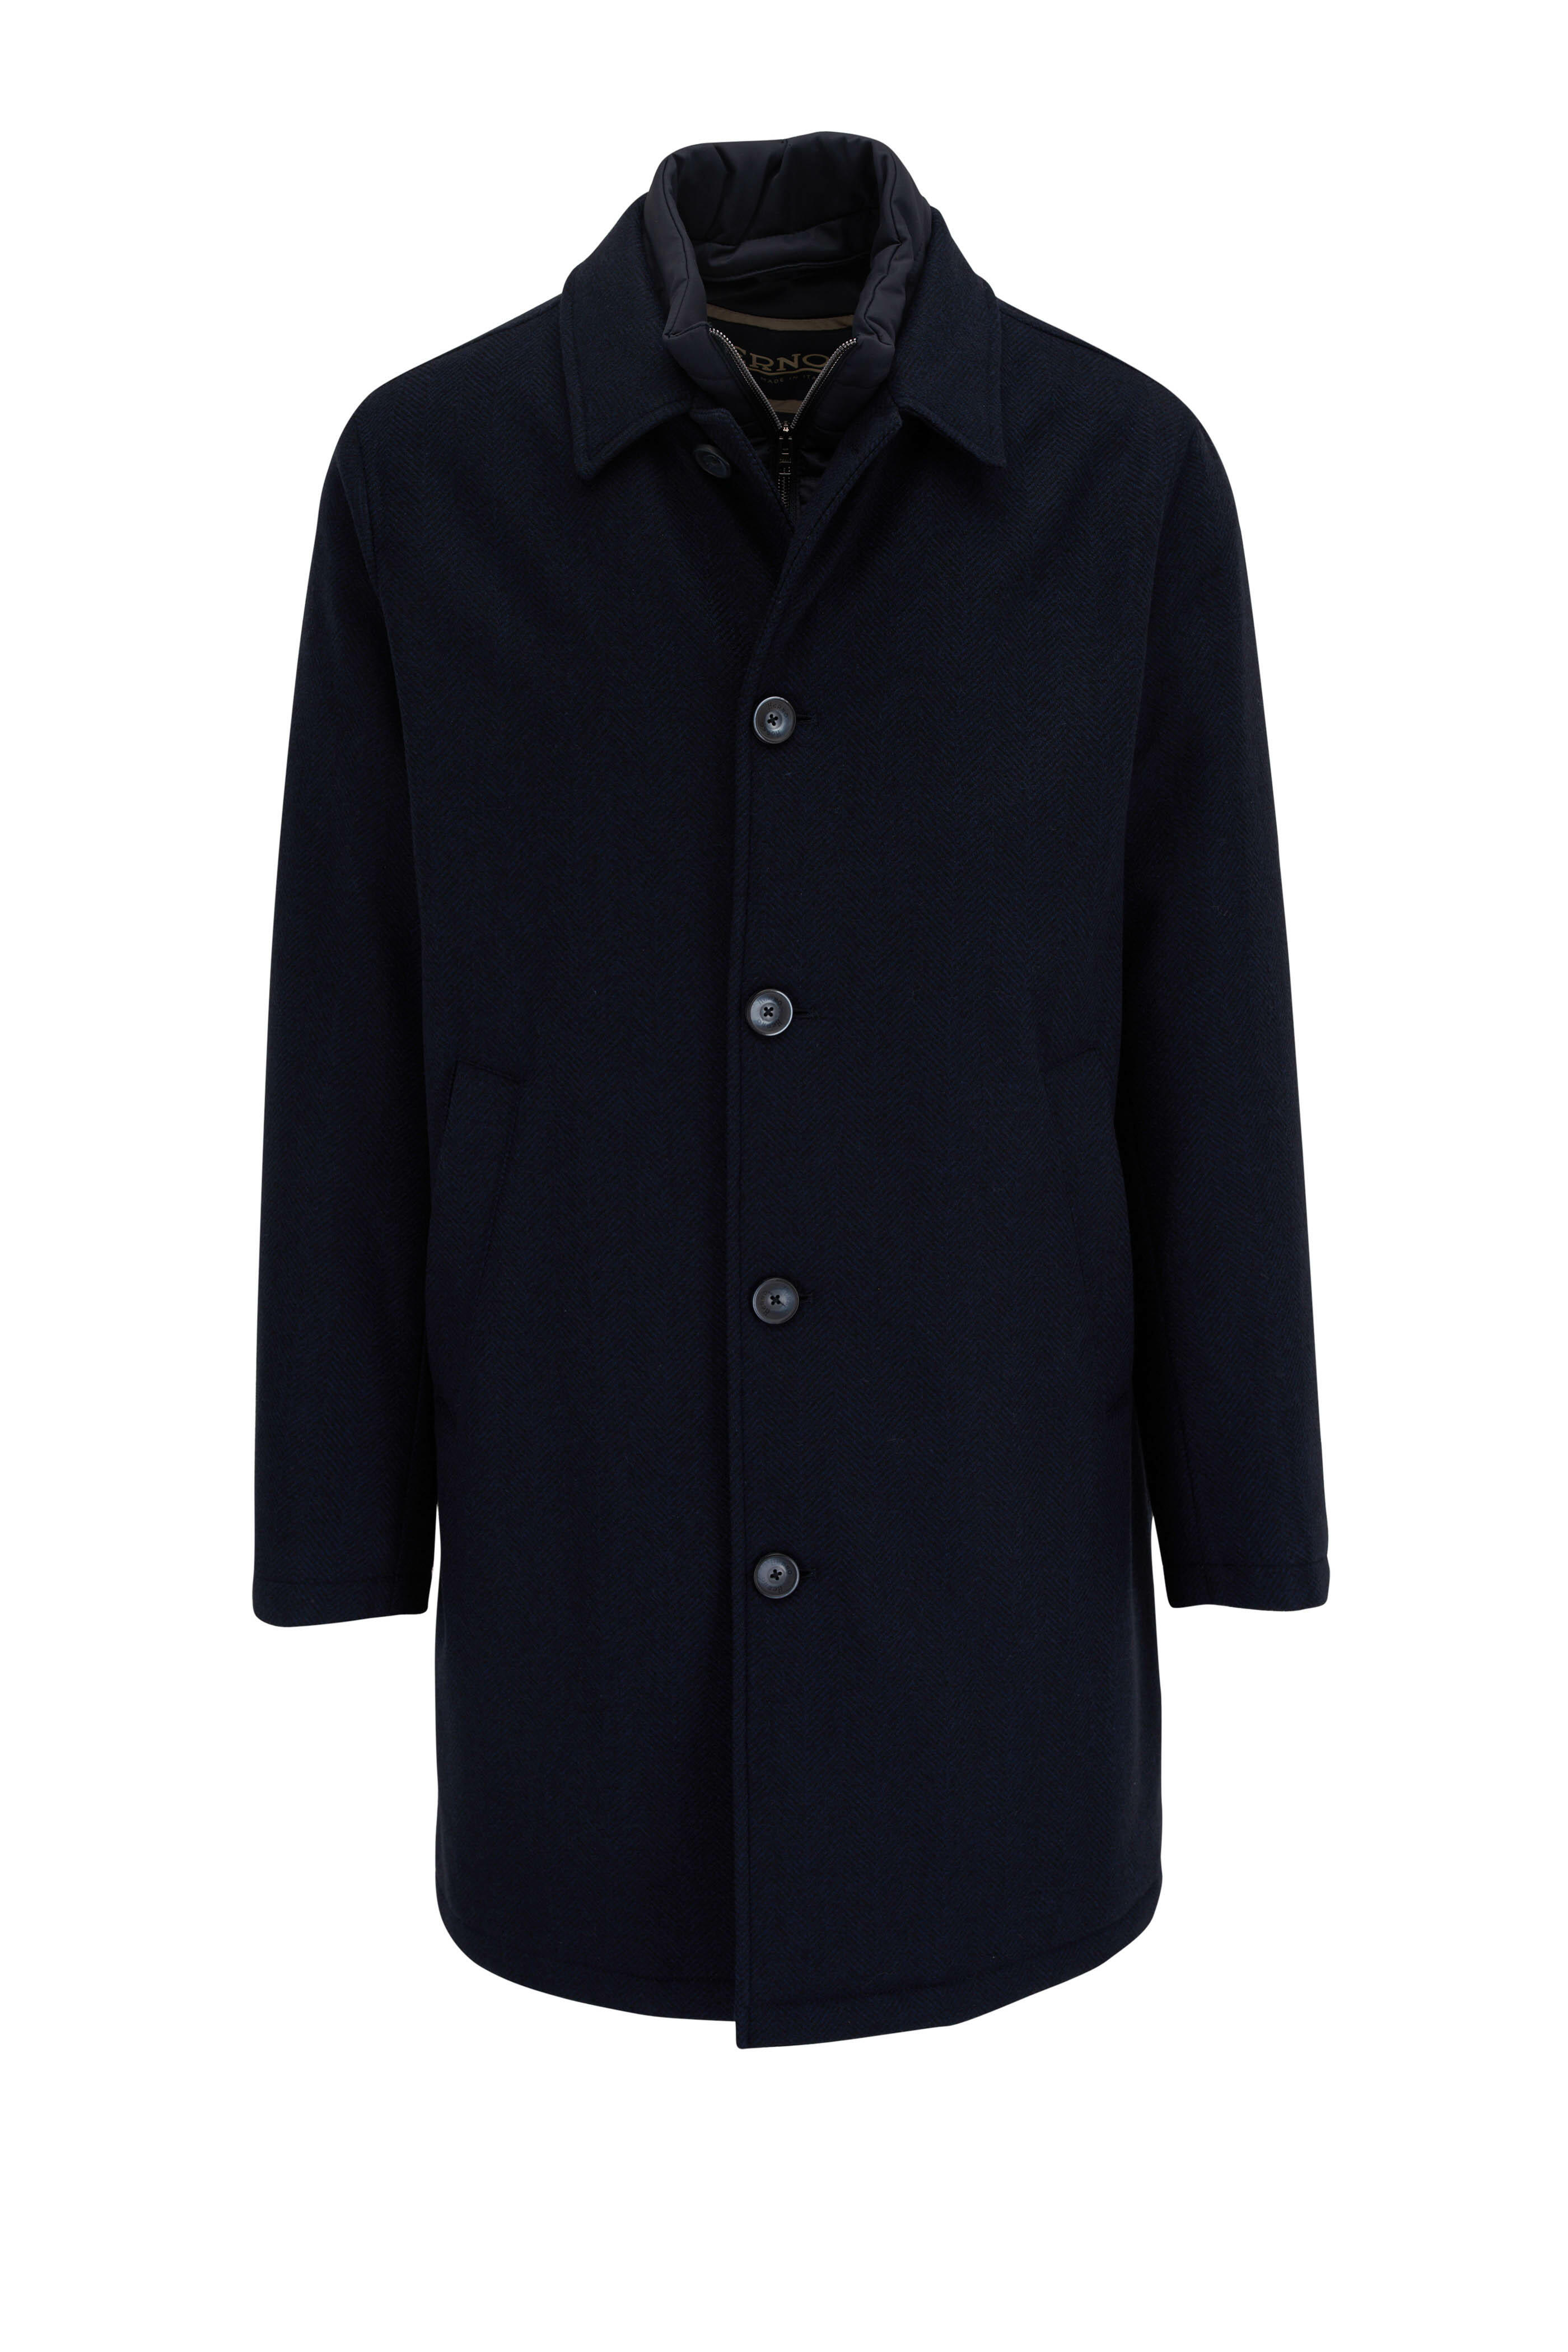 Herno - Navy Wool Dickey Coat | Mitchell Stores